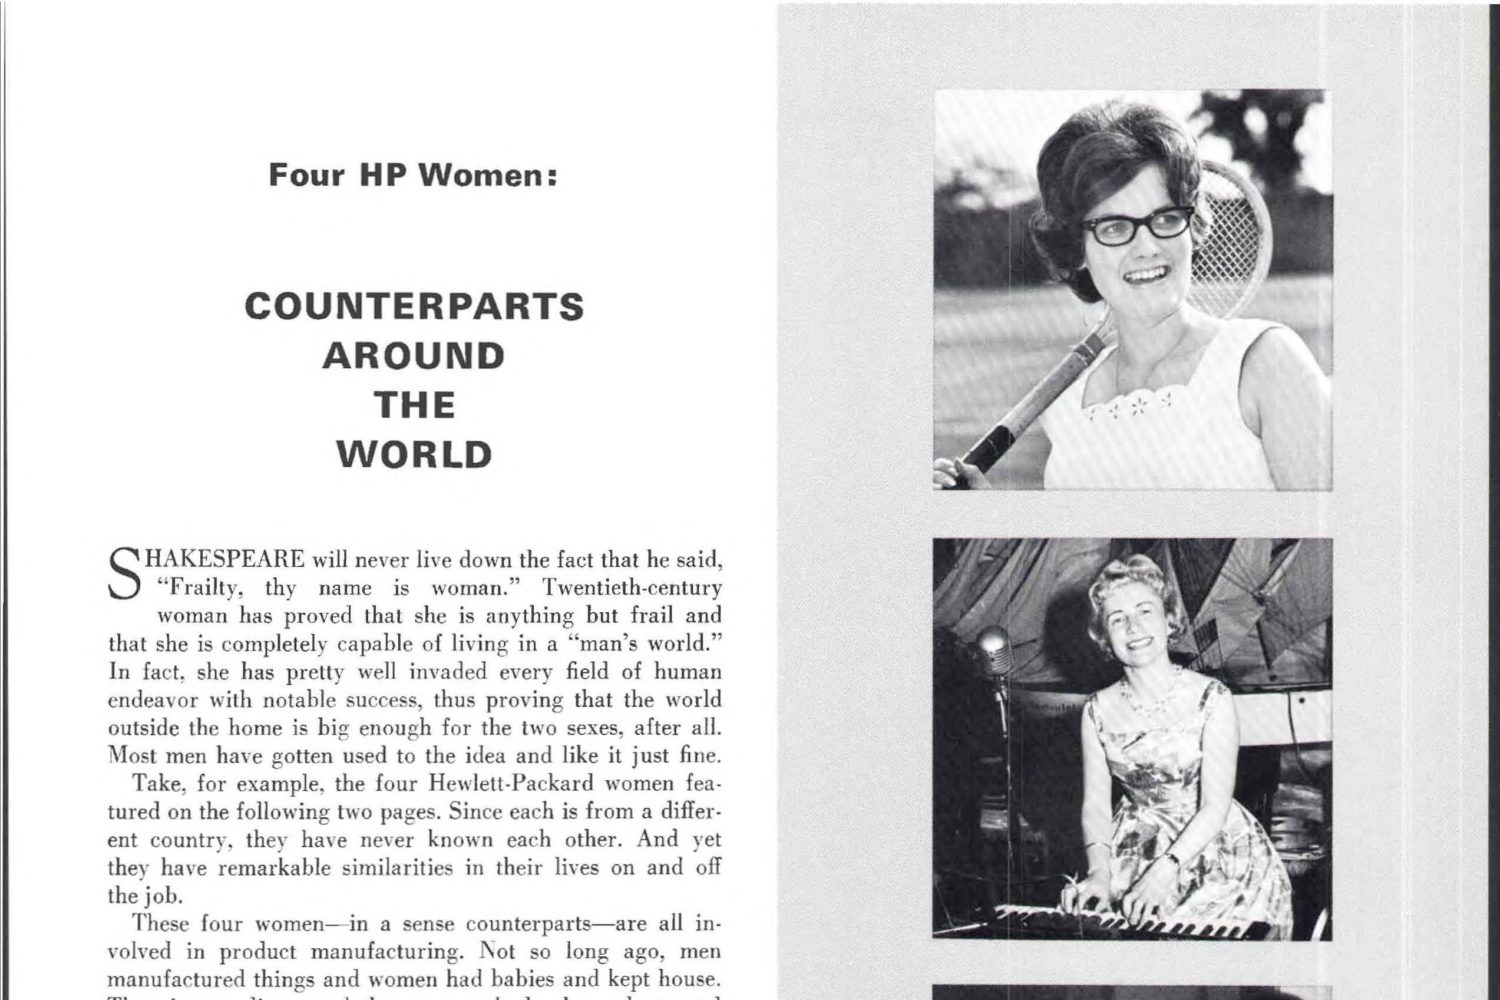 A three-page article entitled Four HP Women: Counterparts Around the World.